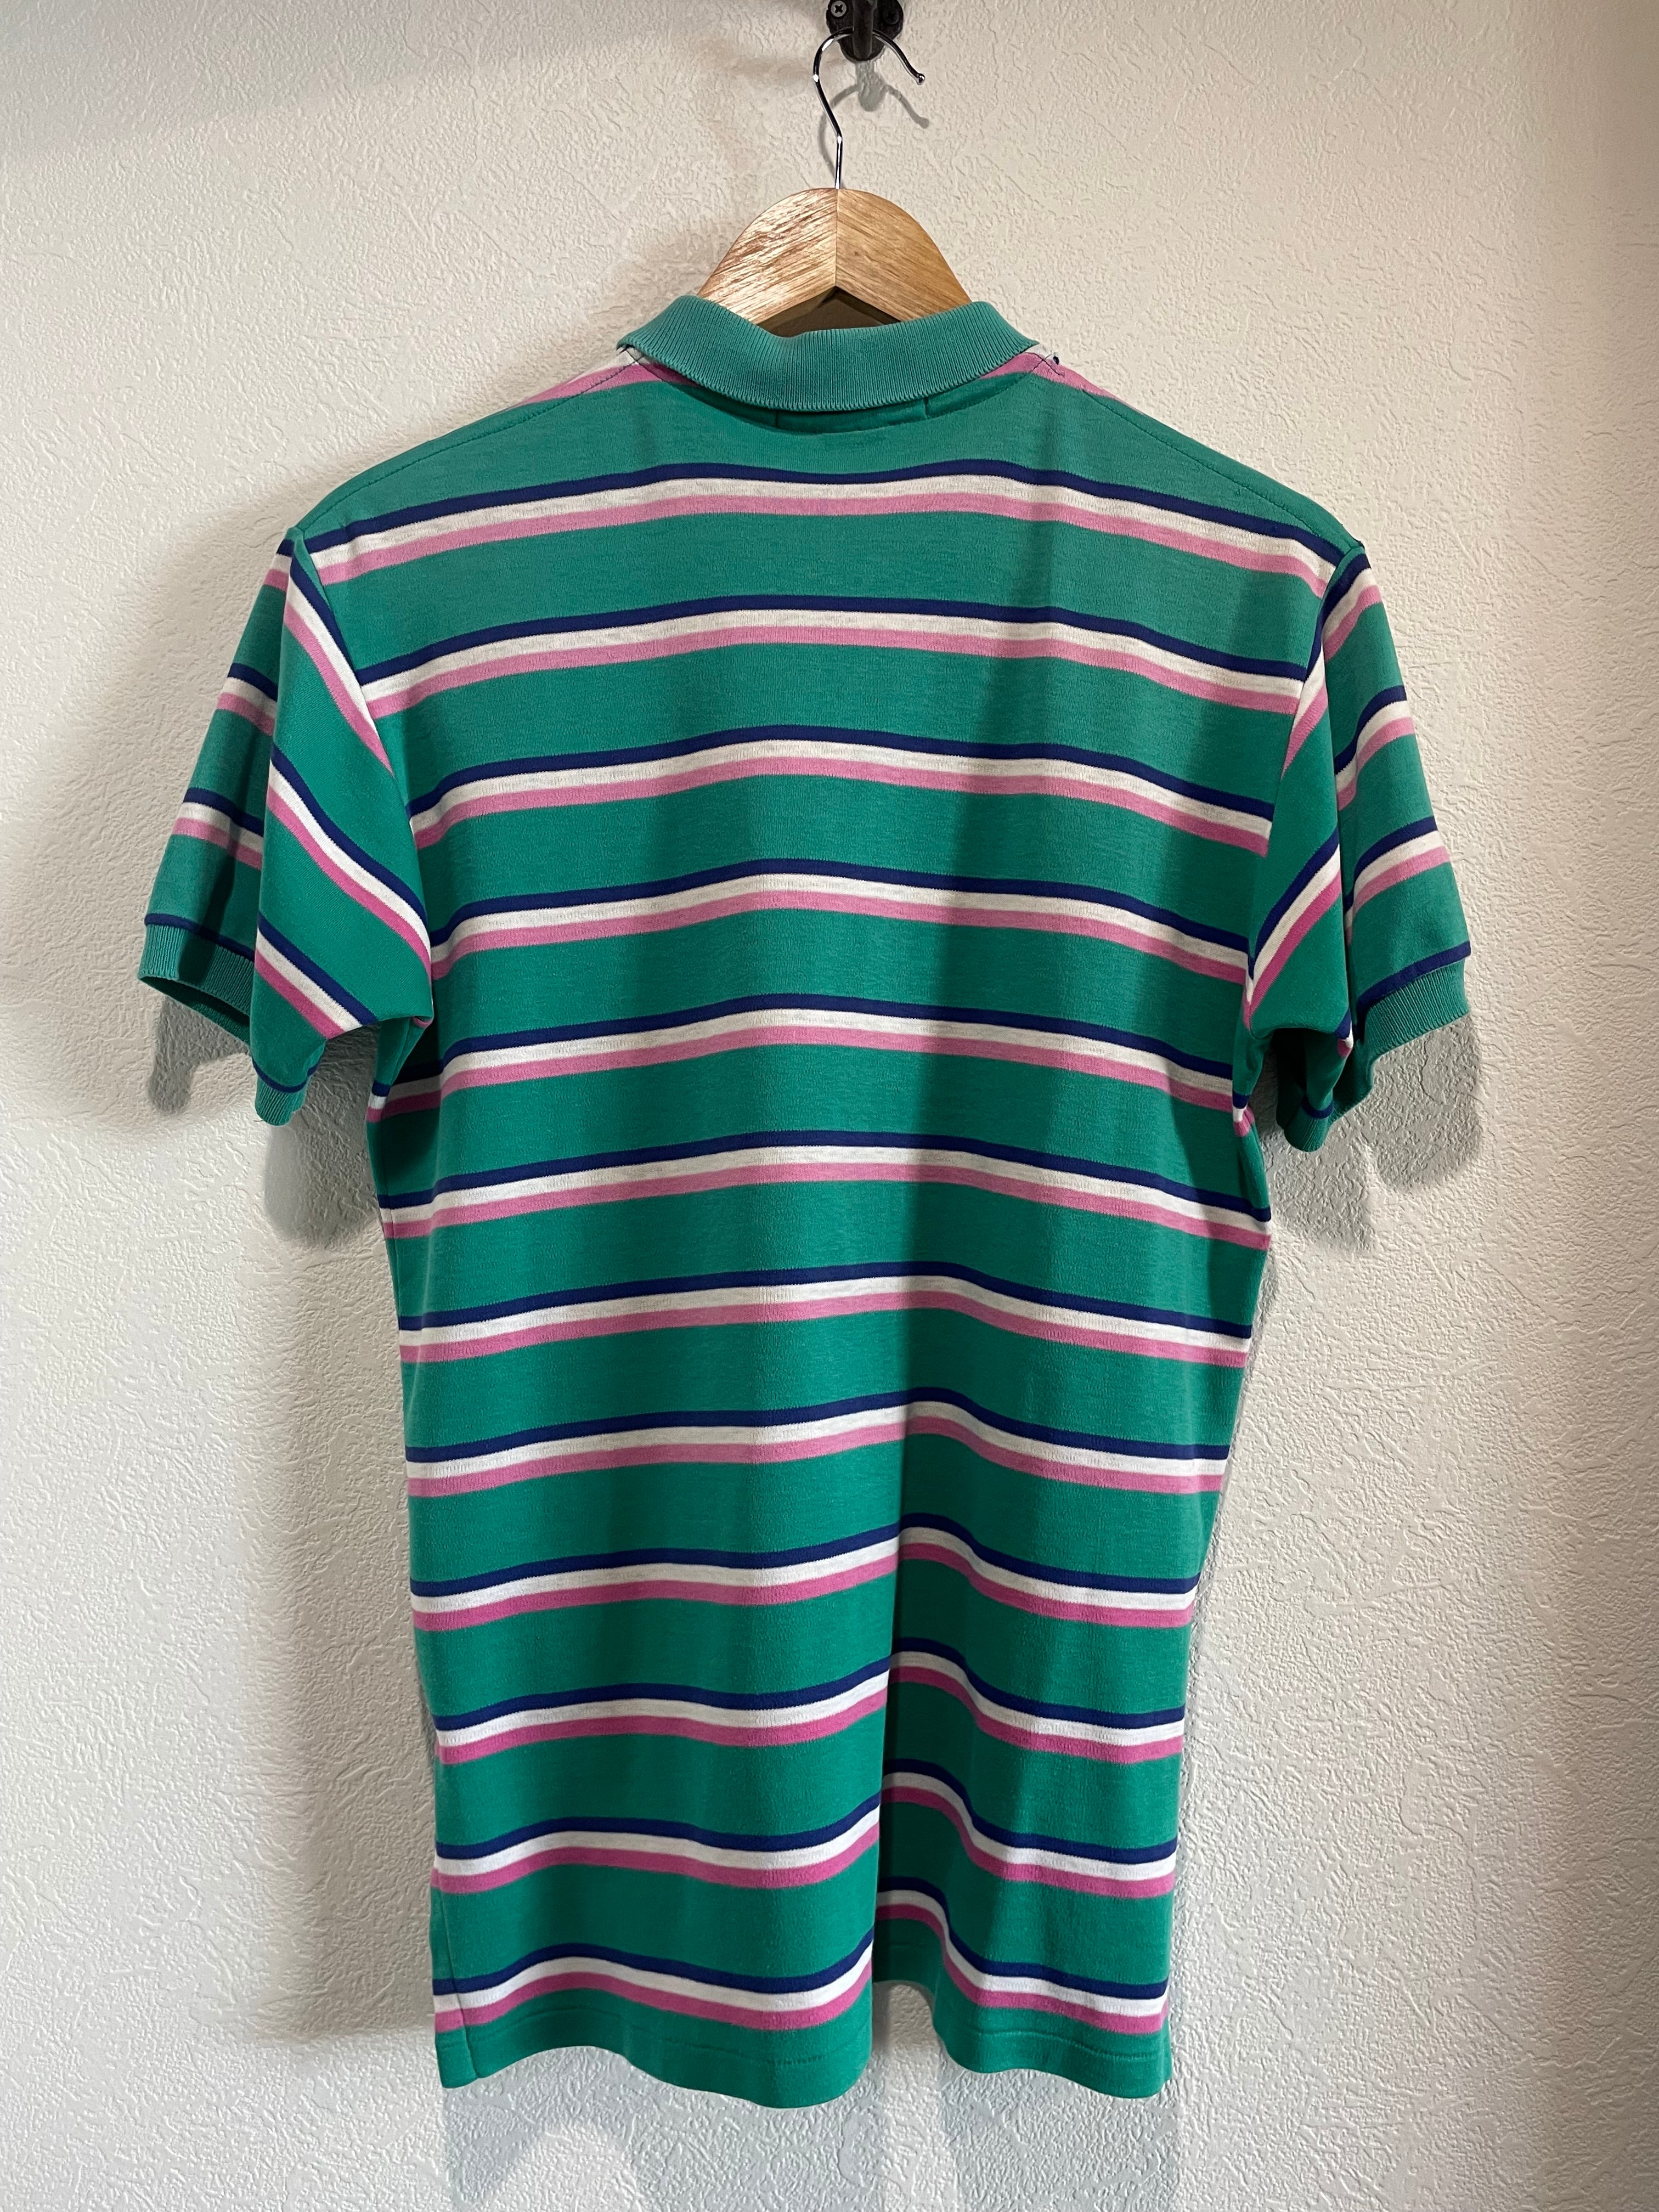 90s〜古着 RalphLauren ラルフローレン ポロシャツ ボーダー柄 ヴィンテージ vintage Usedclothing |  kiTAILORd's ～キテーラーズ～ powered by BASE